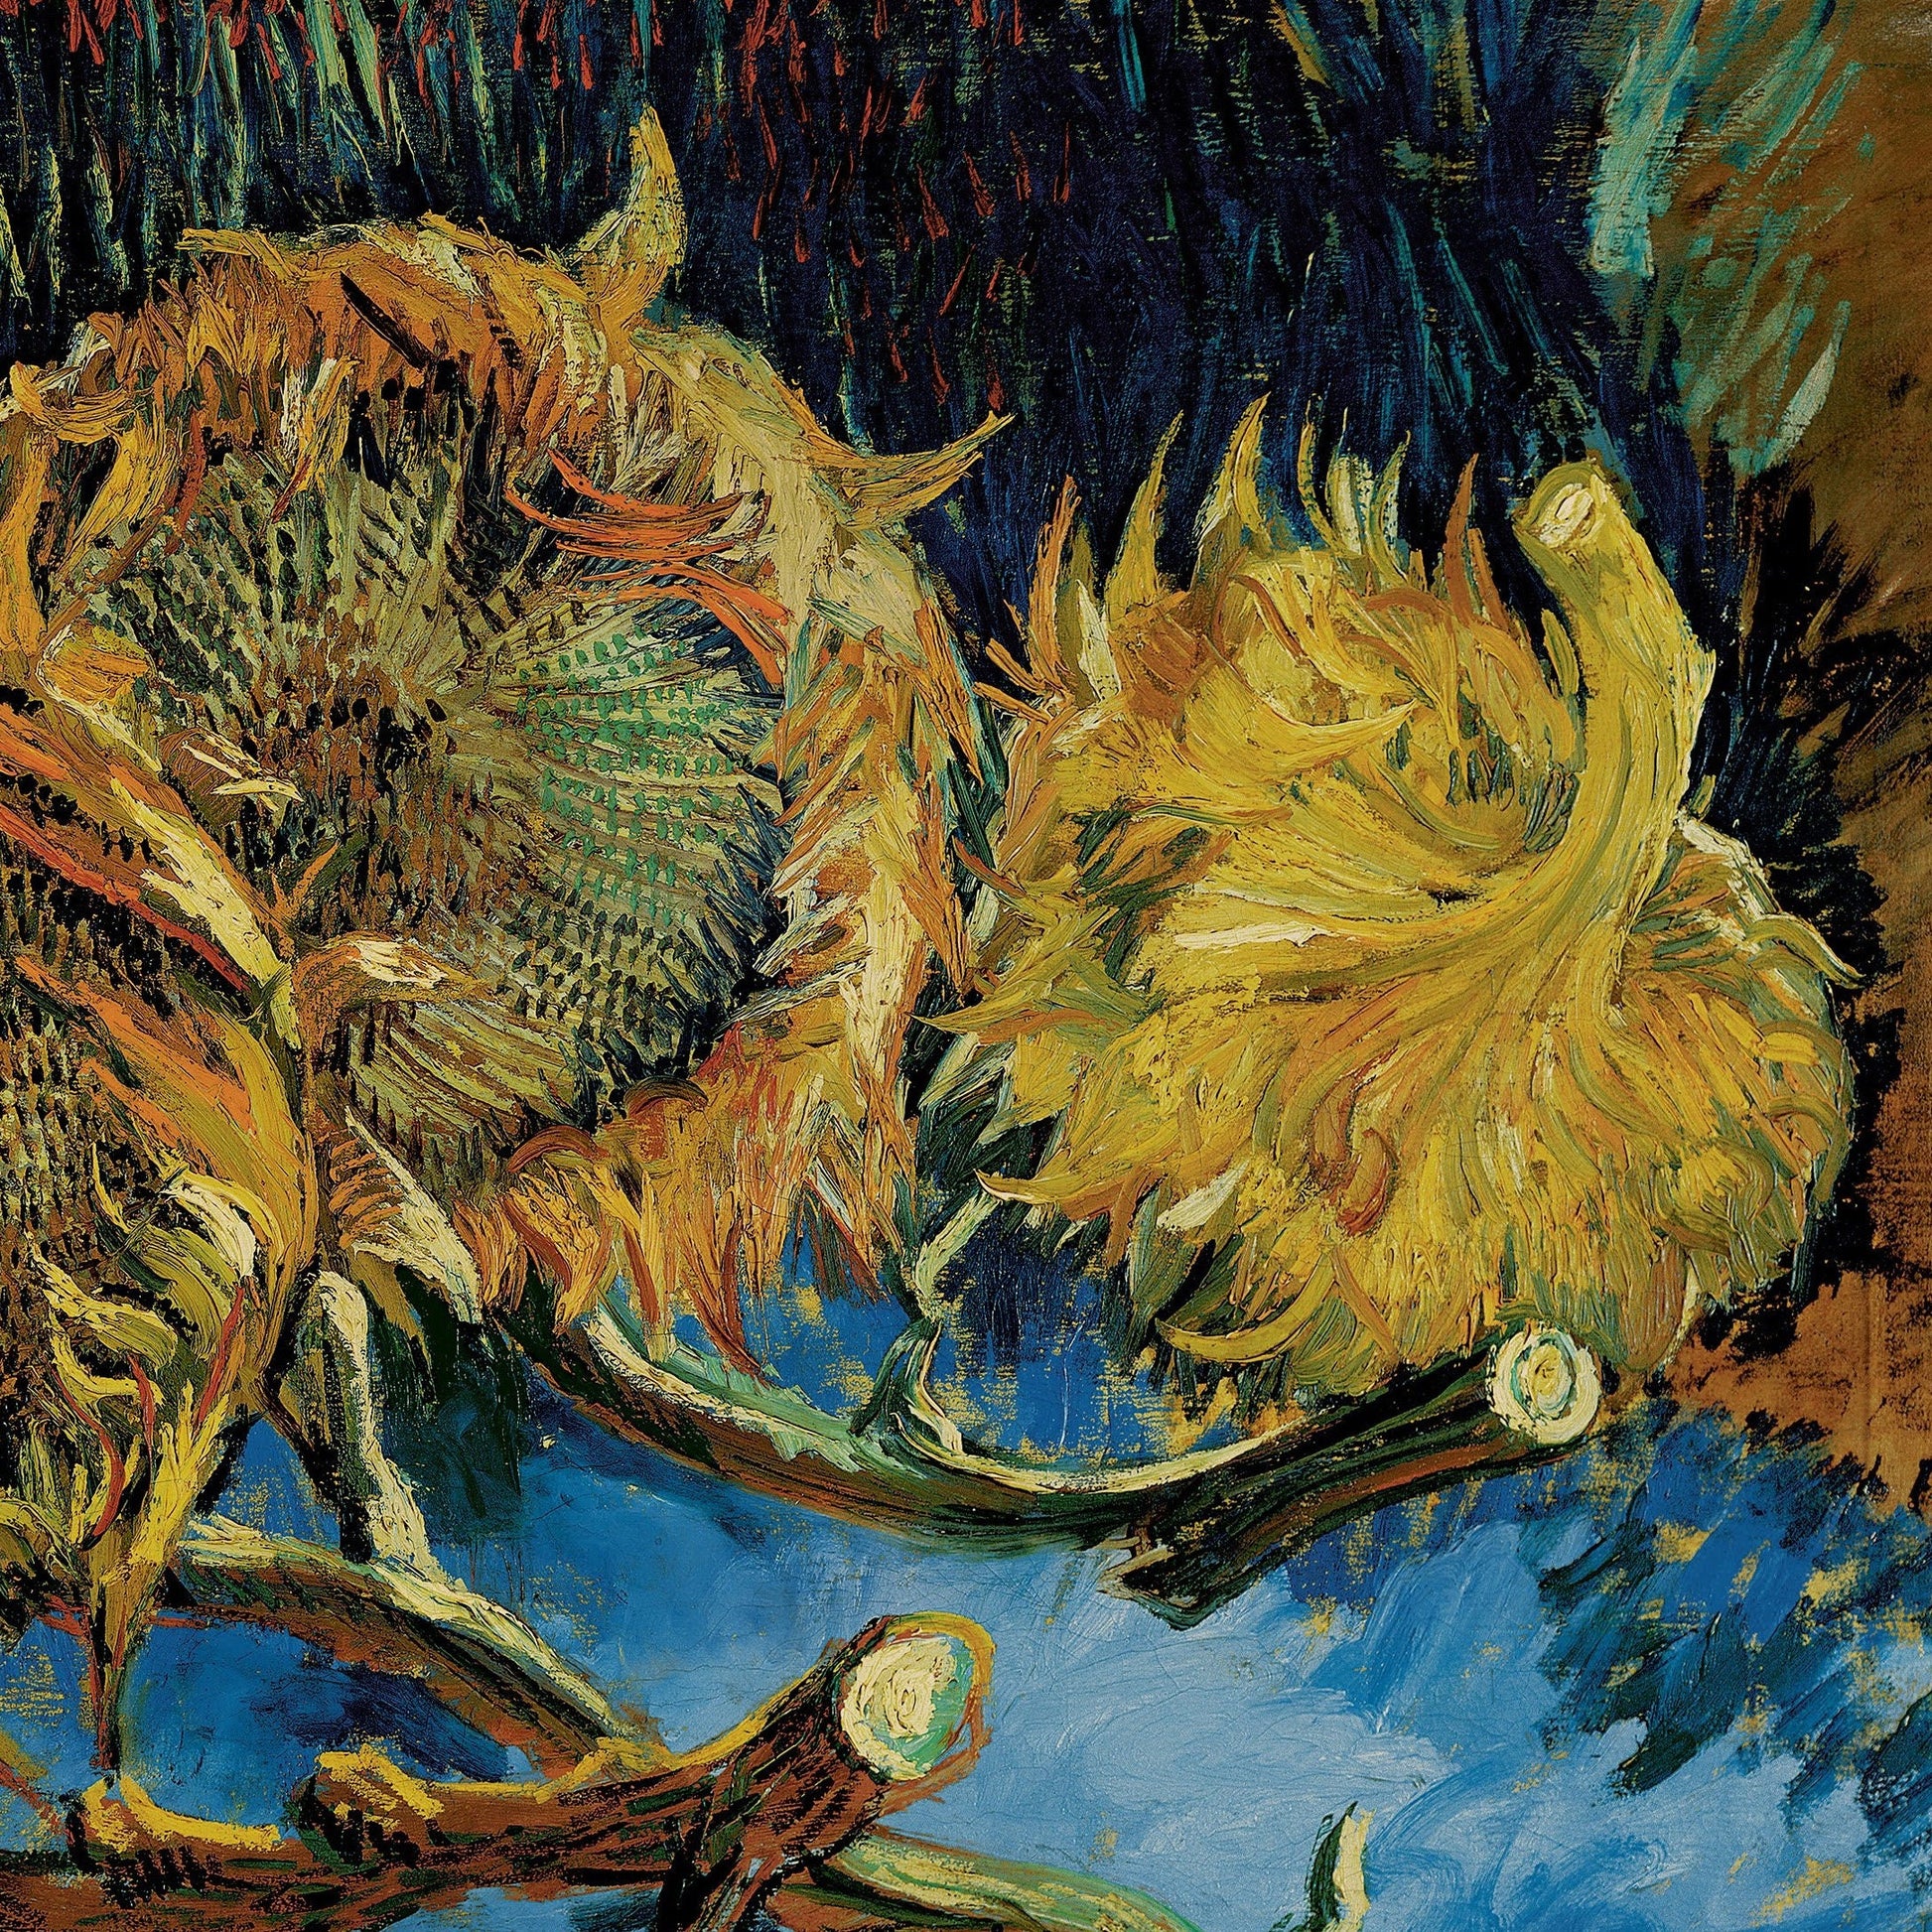 Four Sunflowers Gone to Seed by Vincent Van Gogh, 3d Printed with texture and brush strokes looks like original oil-painting, code:058